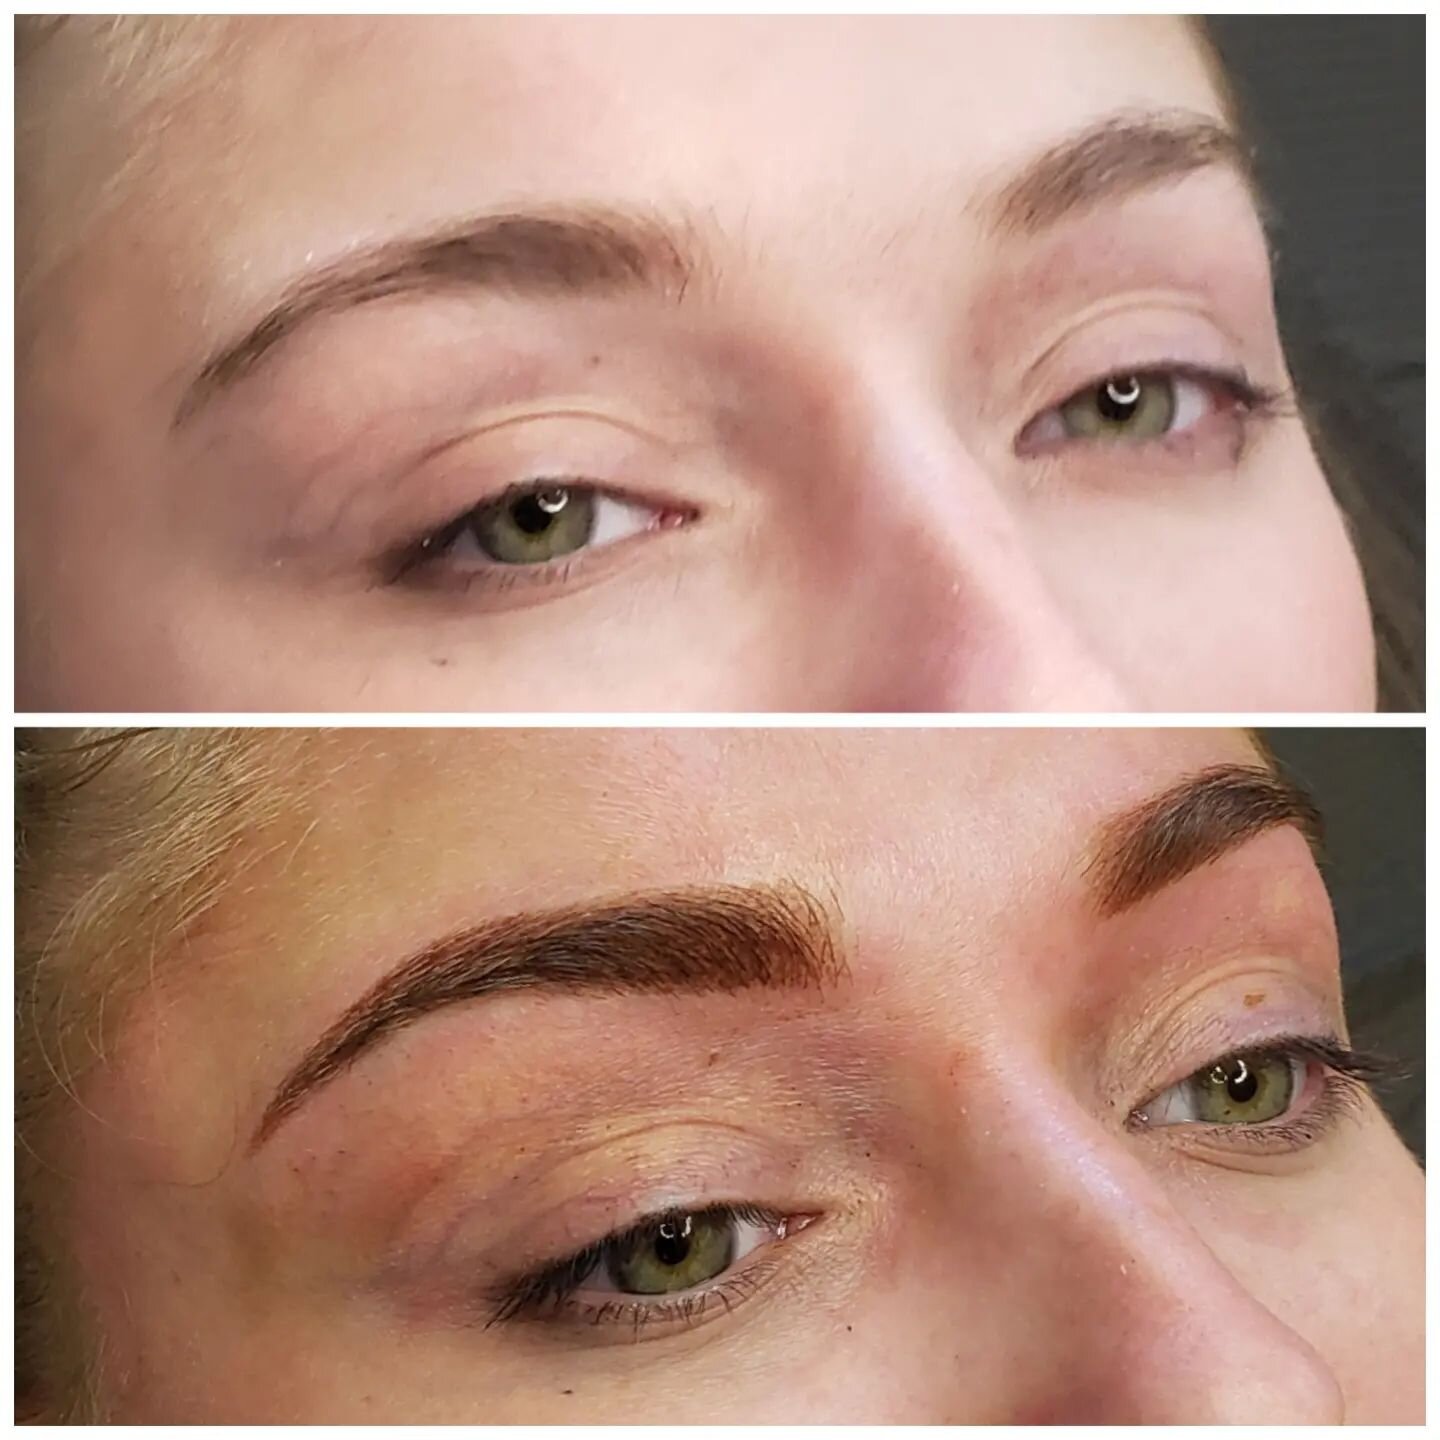 Powder brows were the way to go for this beauty! When you have a alot of brow growth and want color and definition of shape microshading, AKA powder brows are the way to go! 😍

This color will soften and neutralize (lose some of the warmth) as it he